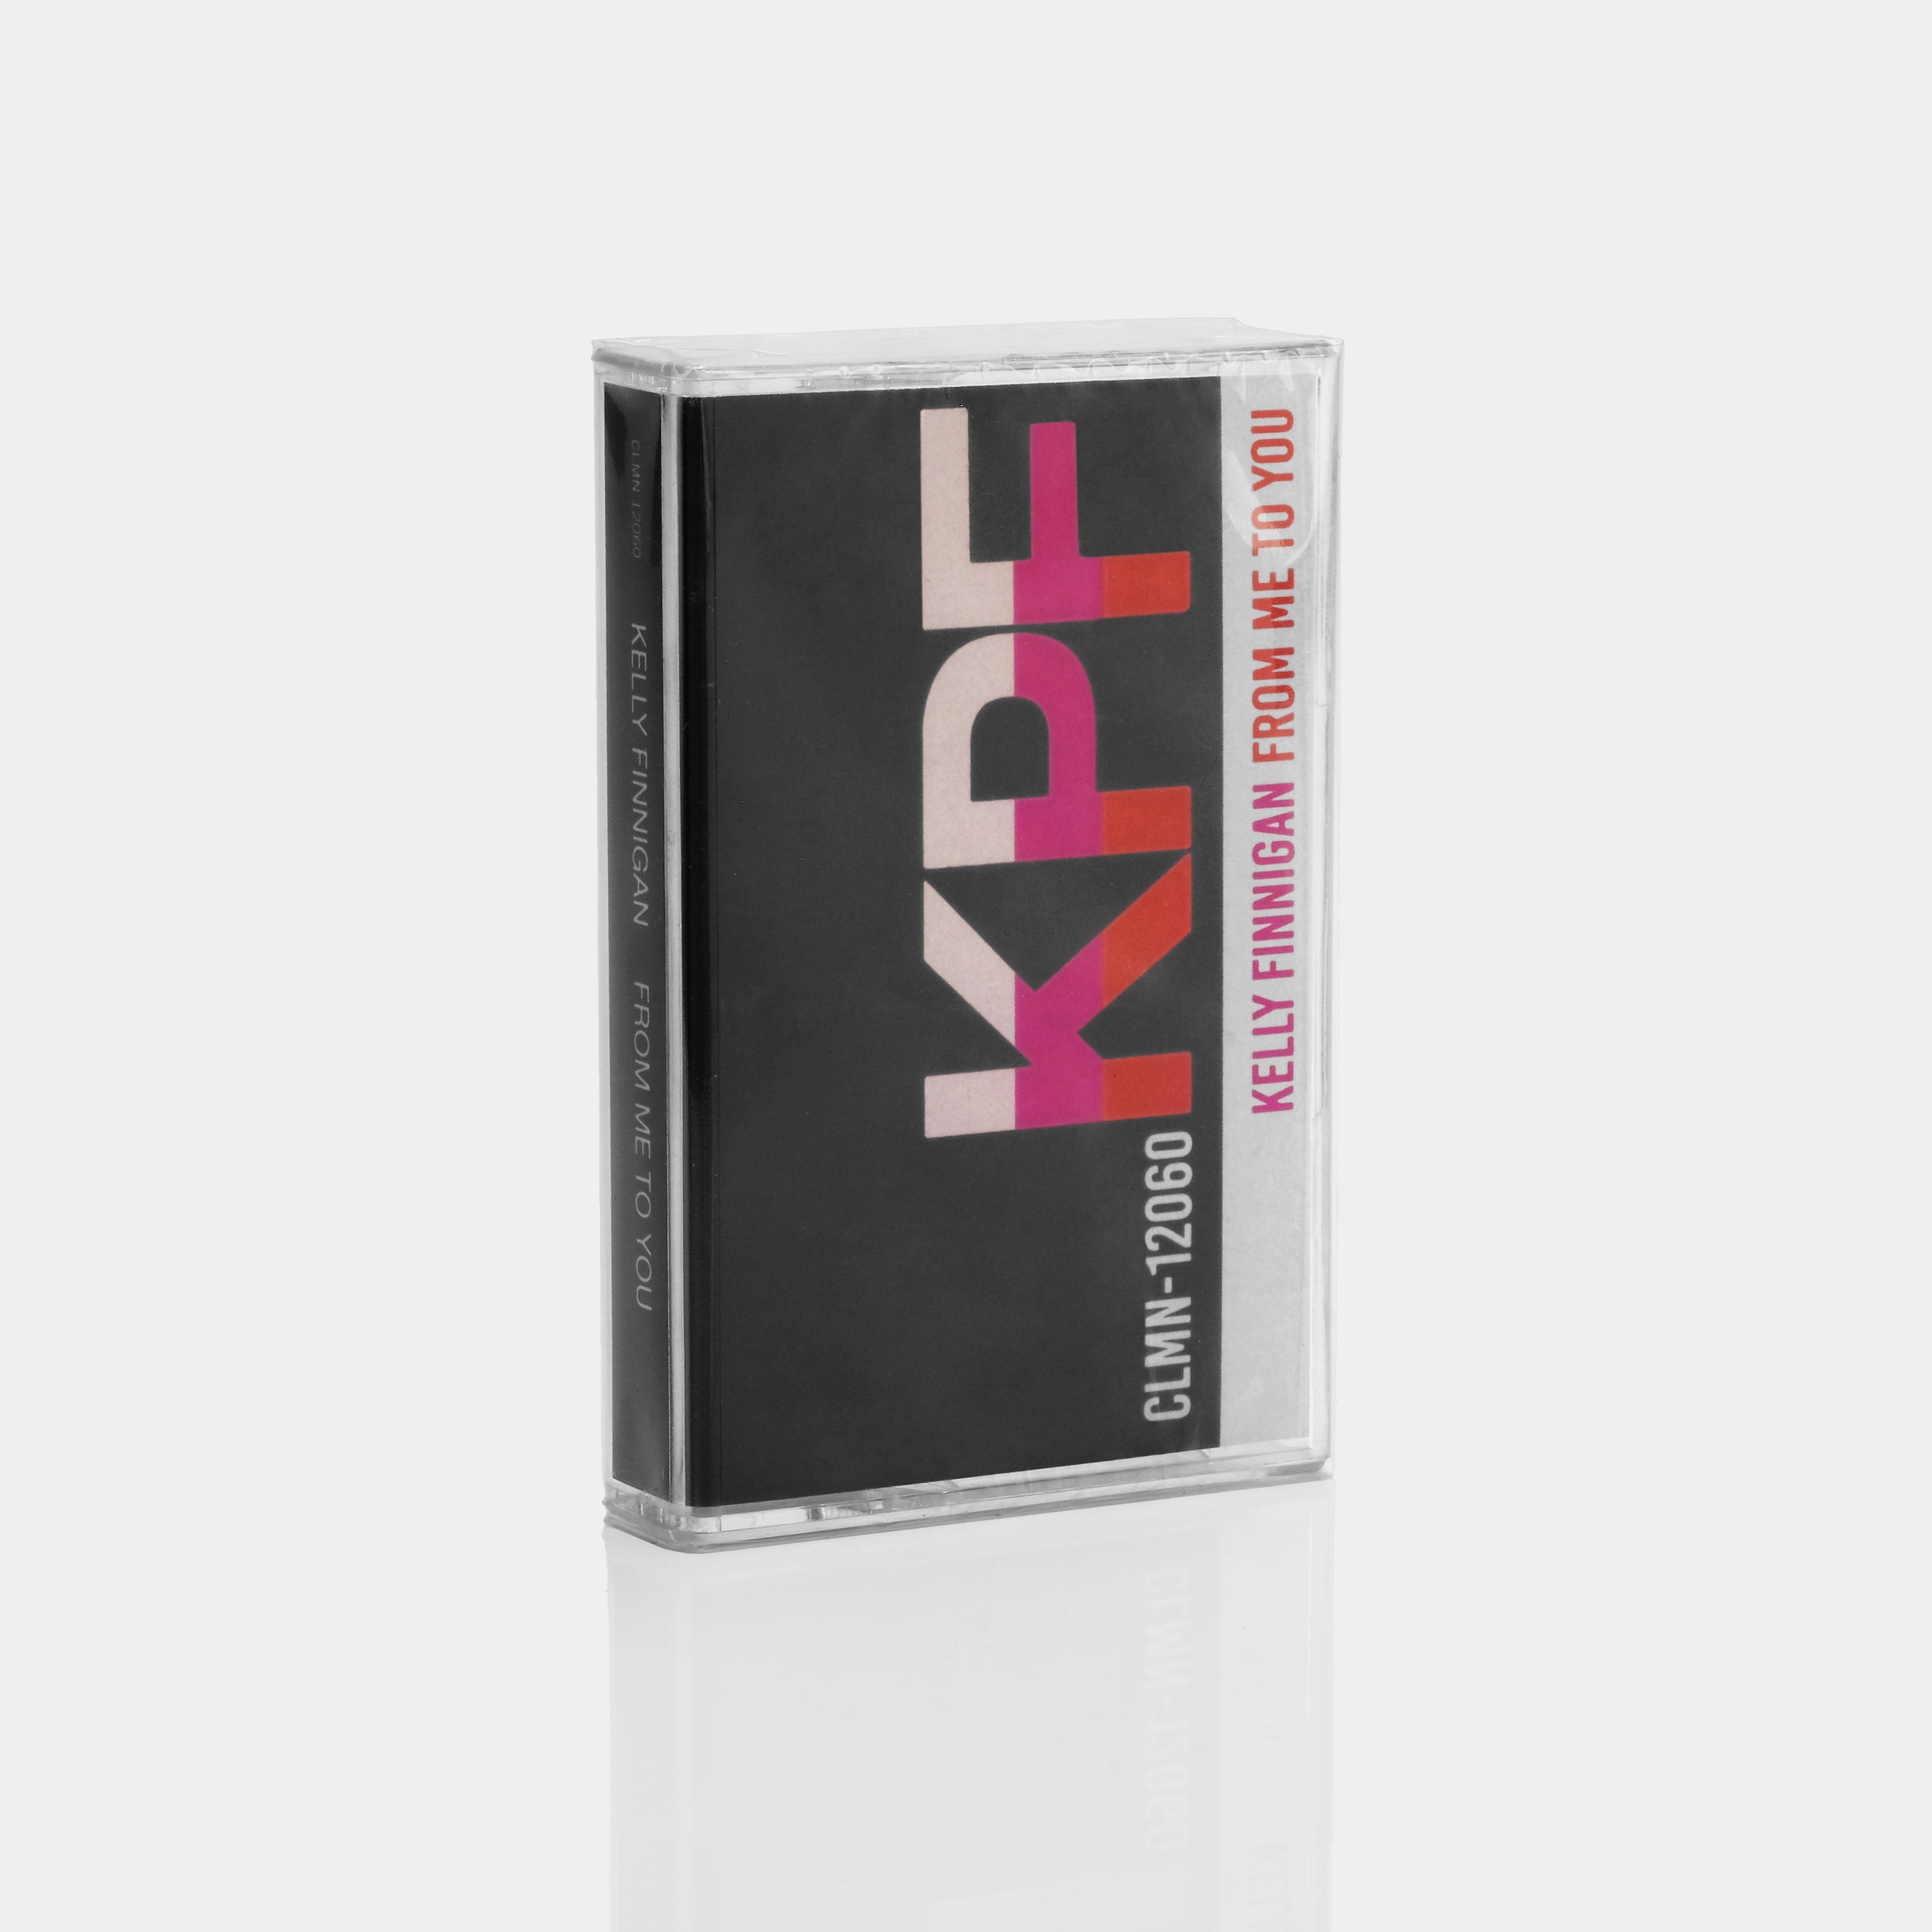 Kelly Finnigan - From Me To You Cassette Tape